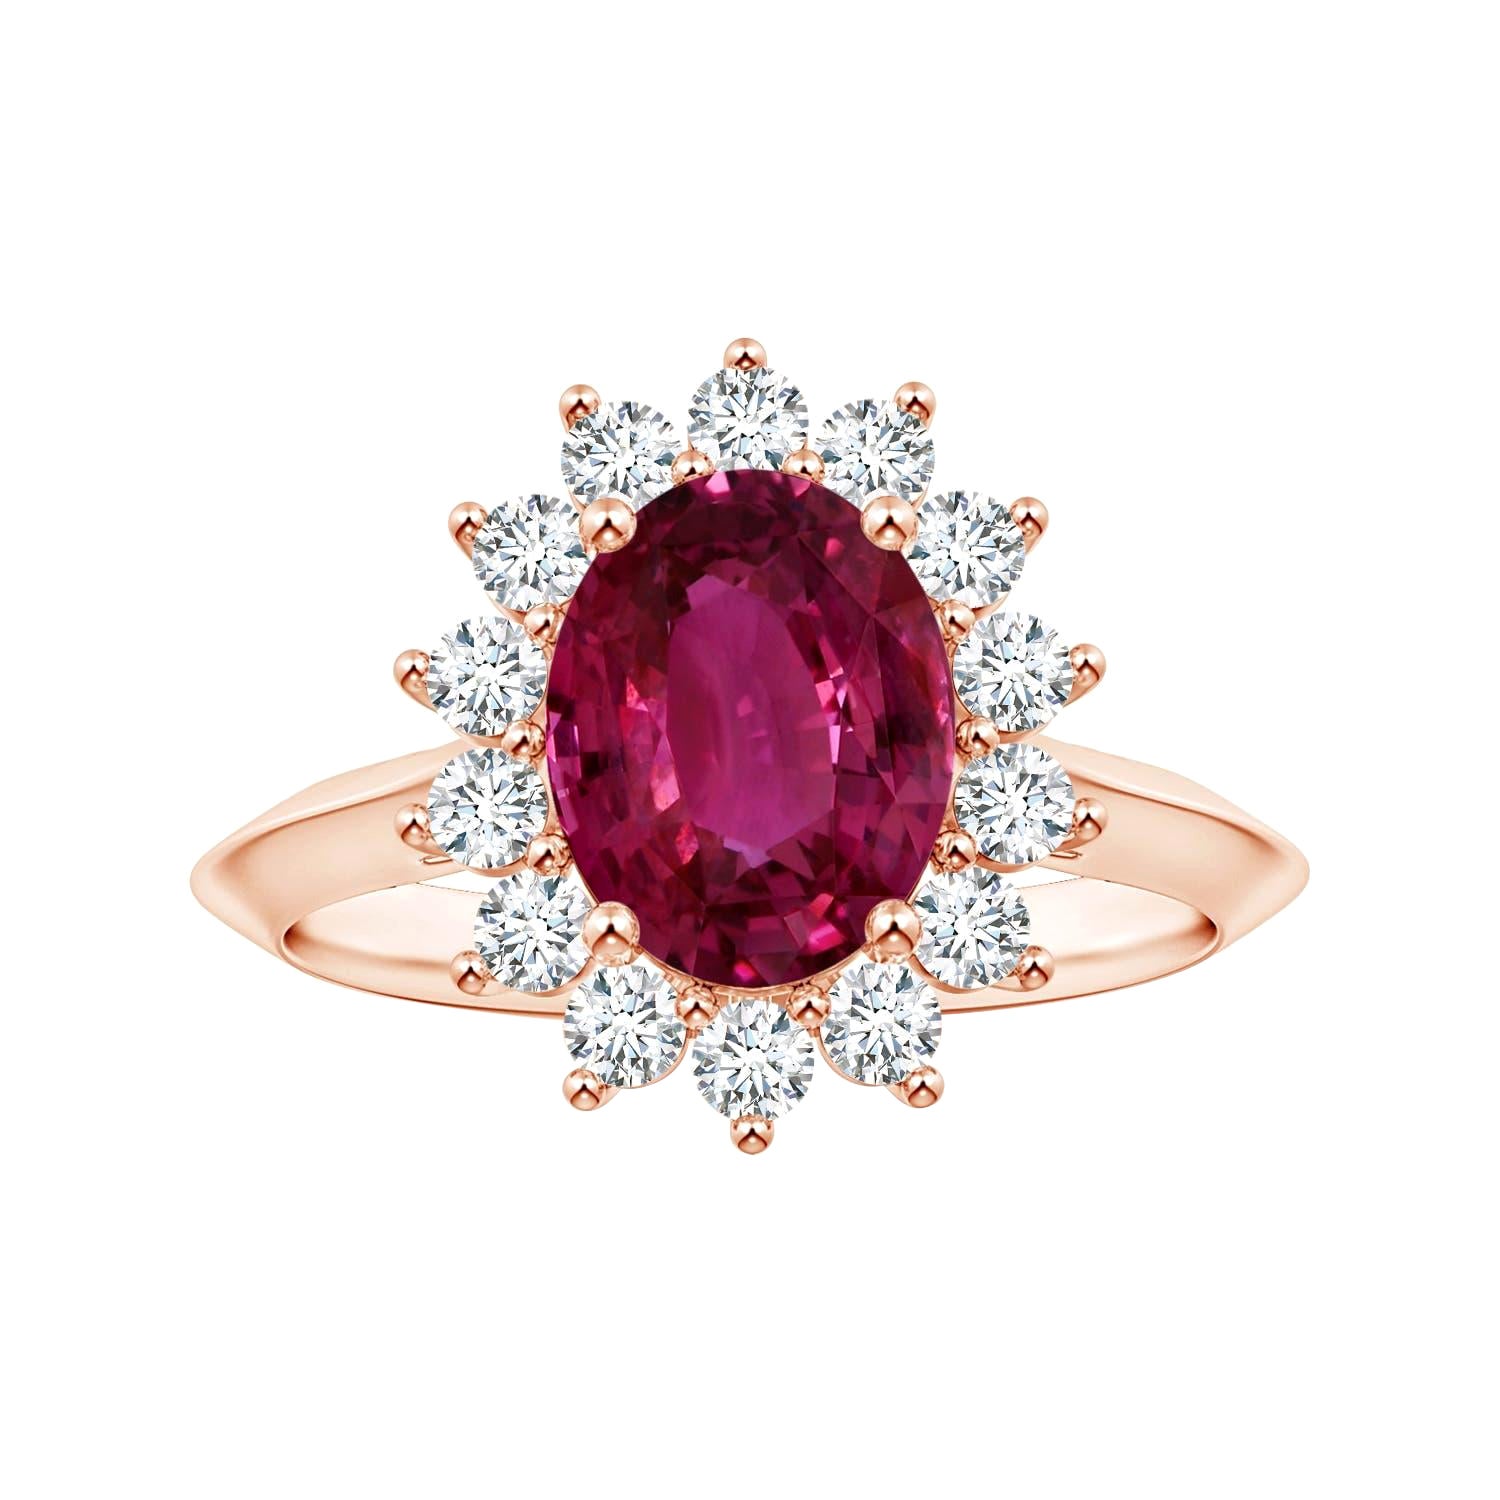 For Sale:  ANGARA Princess Diana Inspired GIA Certified Pink Sapphire Ring in Rose Gold